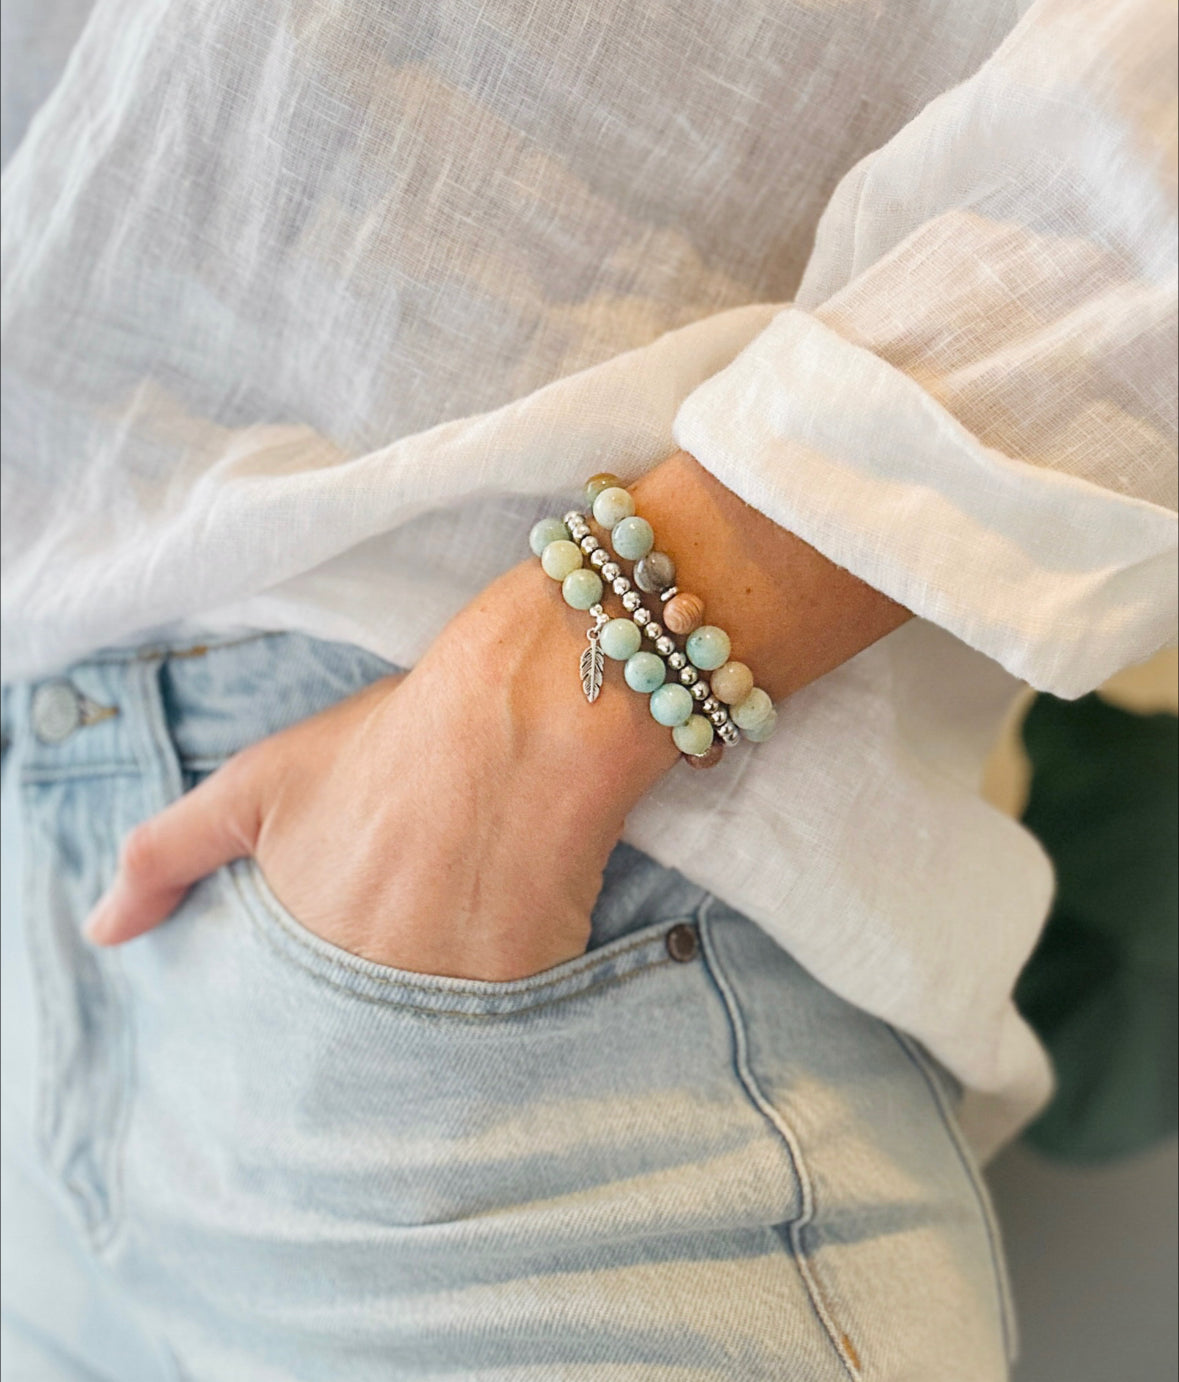 This healing gemstone bracelet stack is crafted with natural Amazonite beads and  feather charm.   Amazonite is known for its soothing energy, promoting calm and tranquility, and is believed to help balance the emotions, reduce stress and anxiety, and enhance communication. Amazonite brings clarity, balance and insight and is soothing to the nerves.